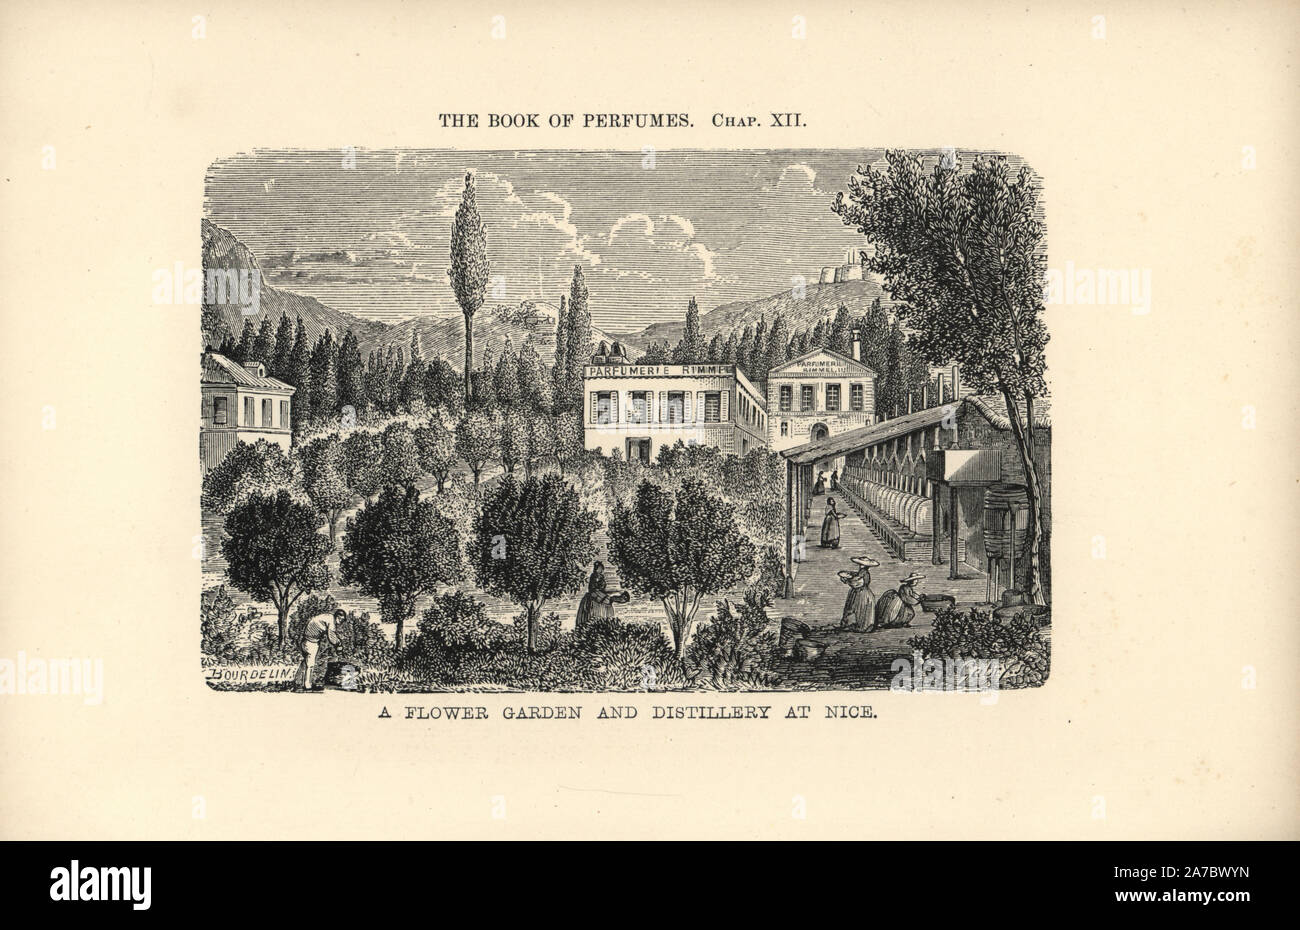 Flower garden and perfume distillery at Nice. Illustration by E. Bourdelin in a woodcut engraving by Gabry from Eugene Rimmel's The Book of Perfumes, London, Chapman and Hall, 1865. Stock Photo